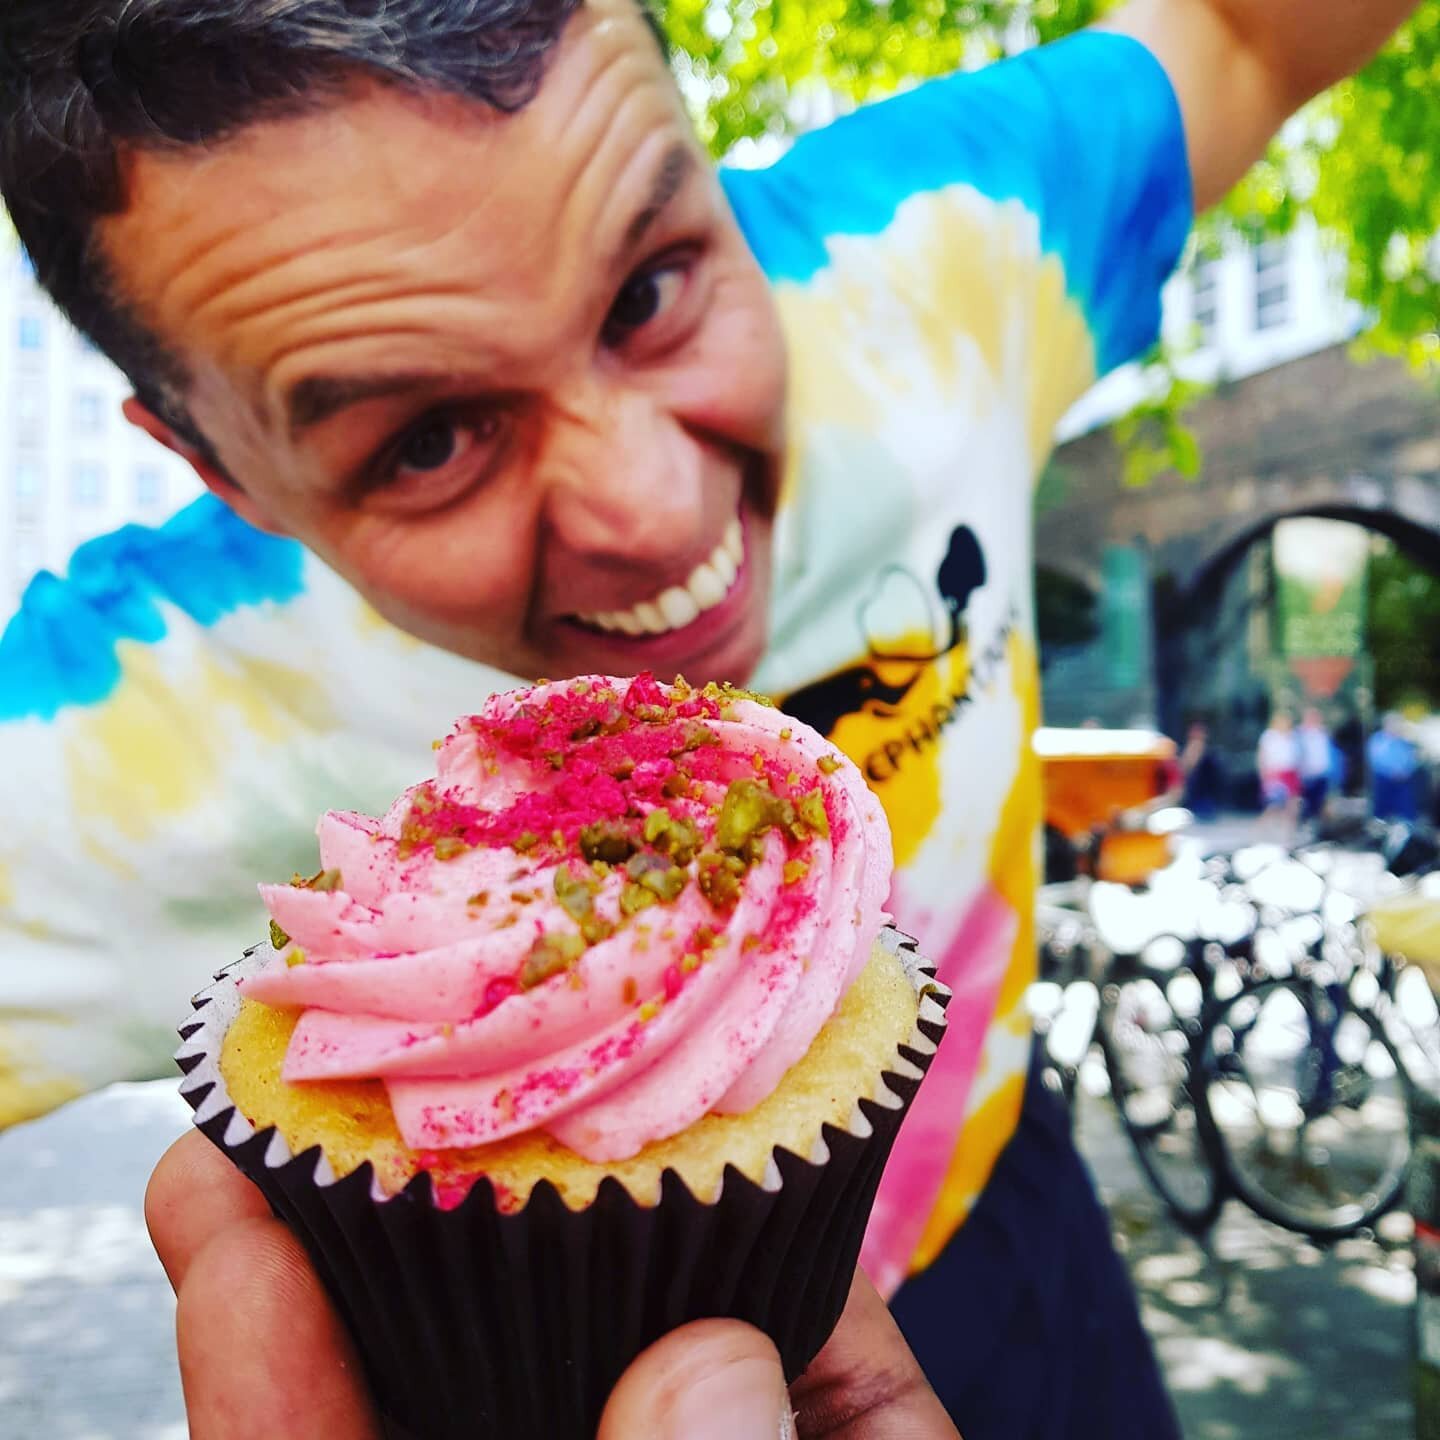 Yes! We are back @scfoodmarket this weekend people. Did you miss us? Well, come find us down at the usual spot serving up some epic cakes. B'cus recently when I was shopping at my local supermarket the shelves were packed with flour, yeast, sugar and